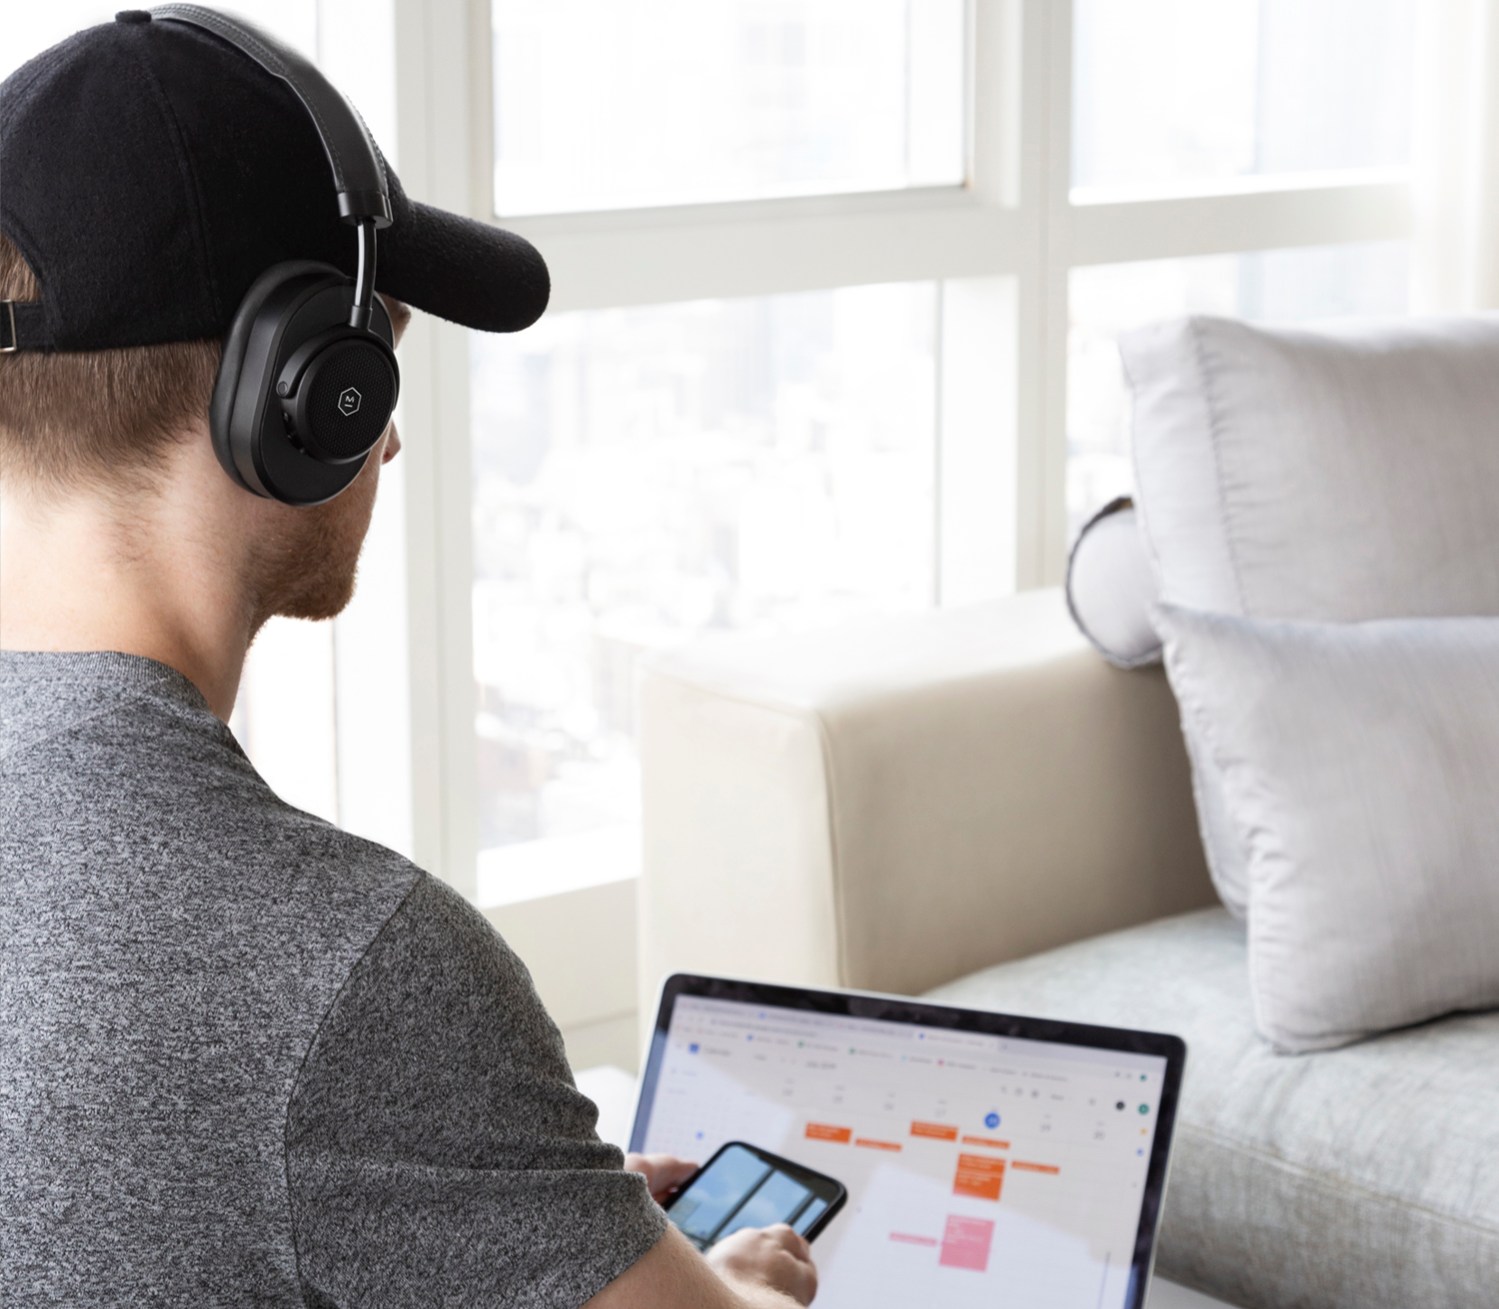 The MW65 Wireless Headphones feature two levels of active noise-cancelling